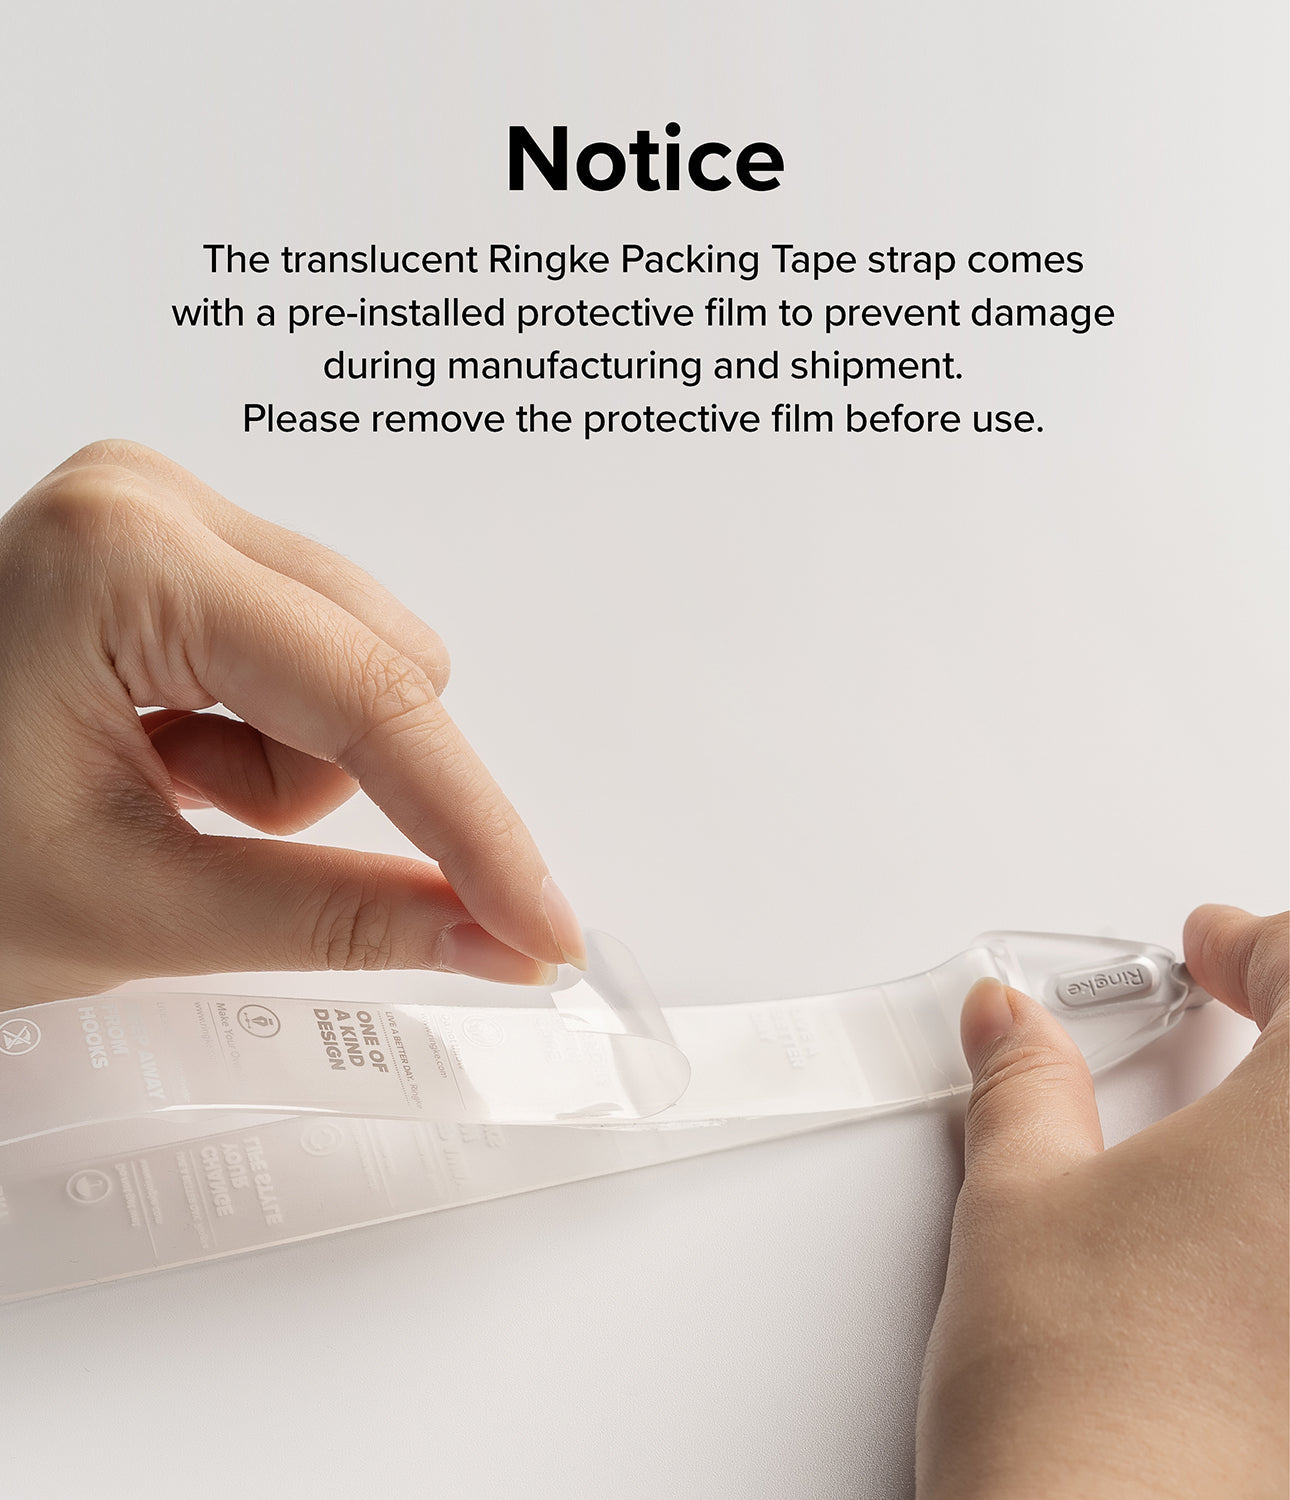 TPU Hand Strap - Ringke Packing Tape comes with a pre-installed protective film to prevent damage